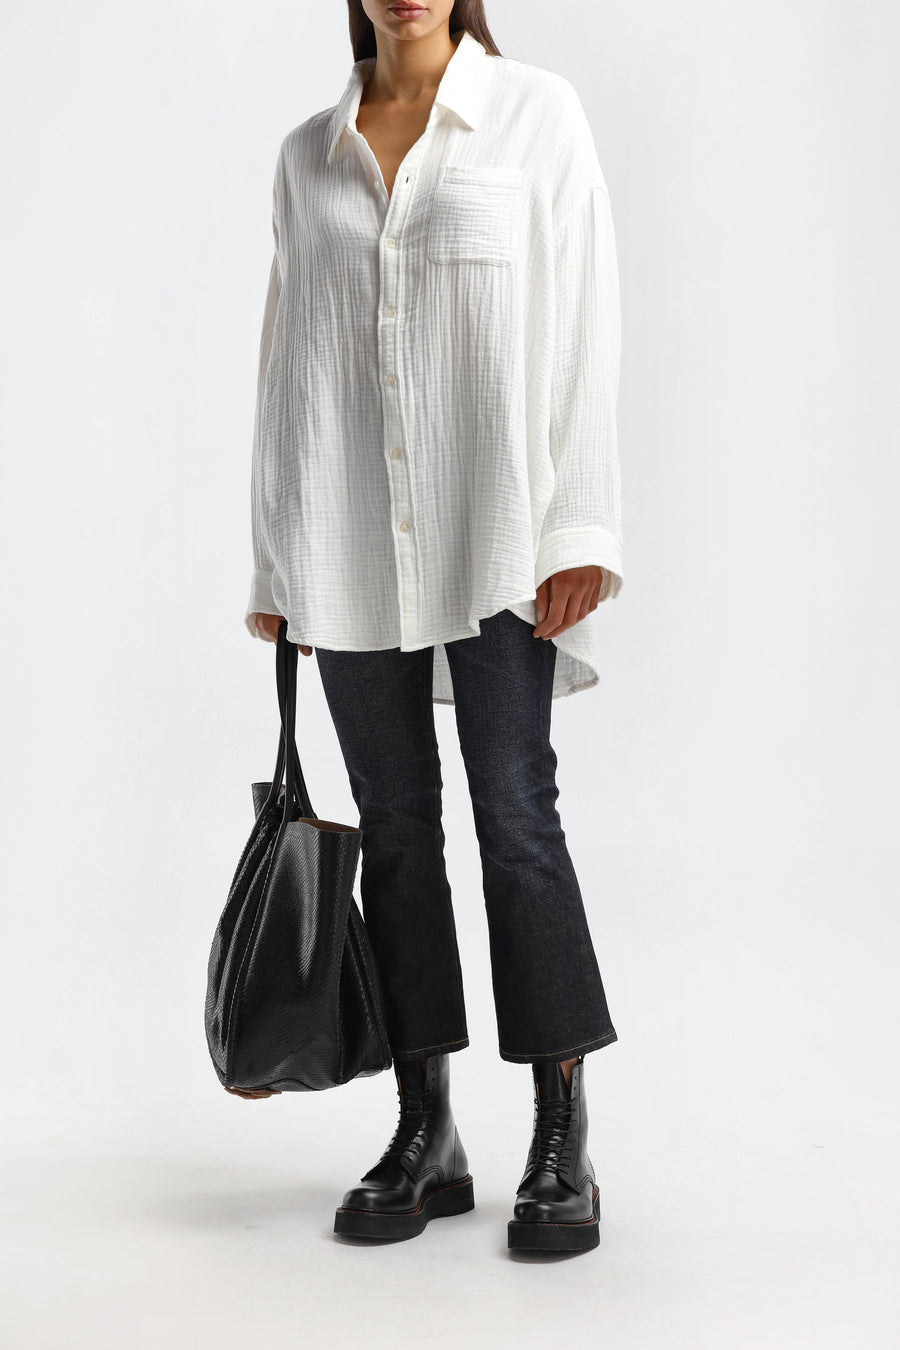 Bluse Button Front in EcruDenimist - Anita Hass